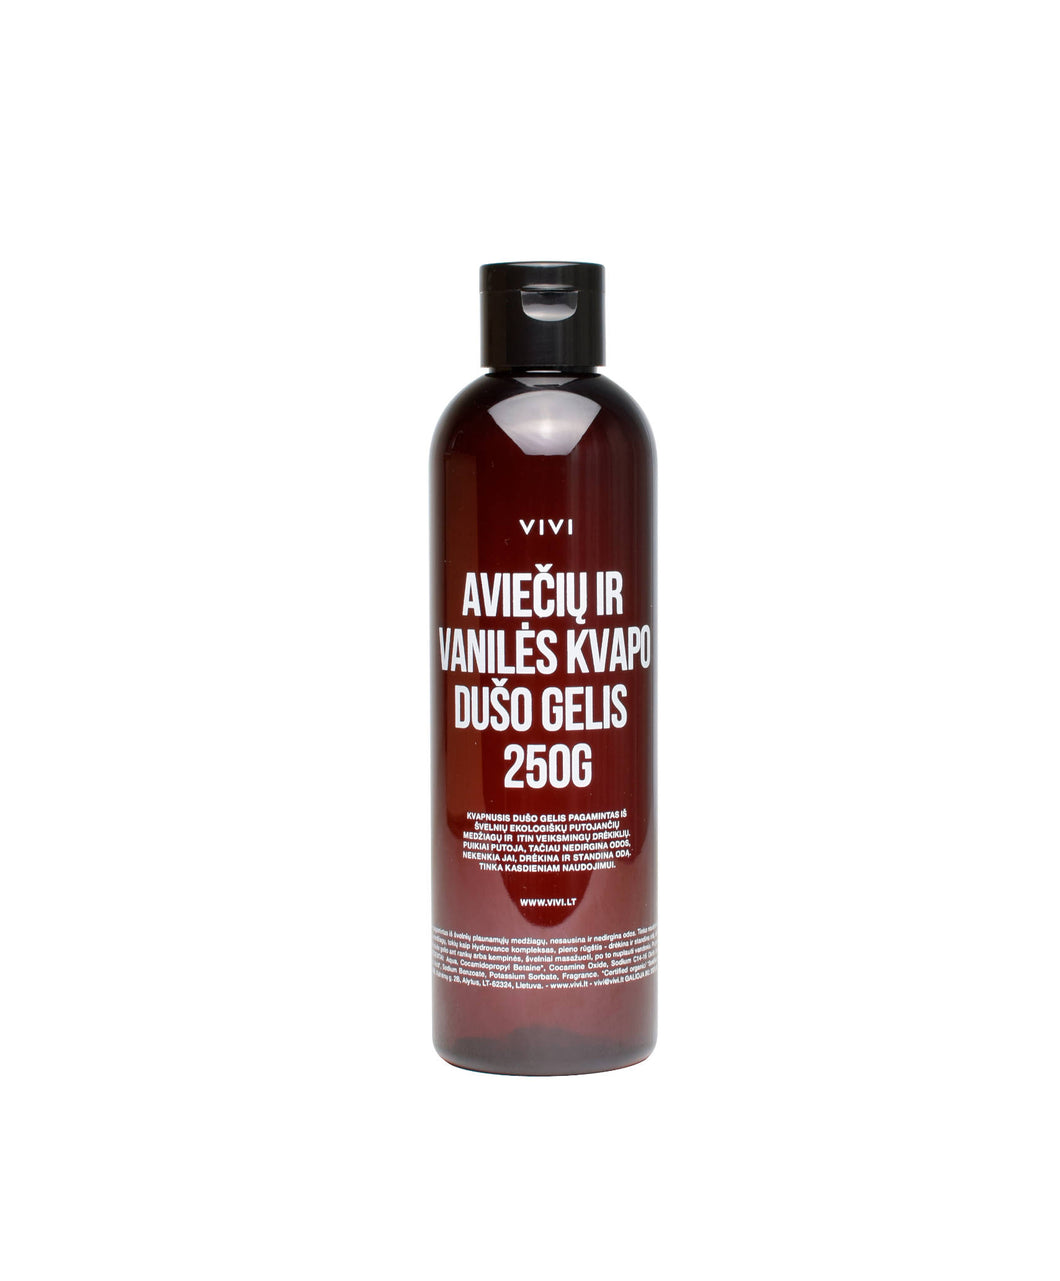 Blueberry and vanilla scented shower gel, 250g.